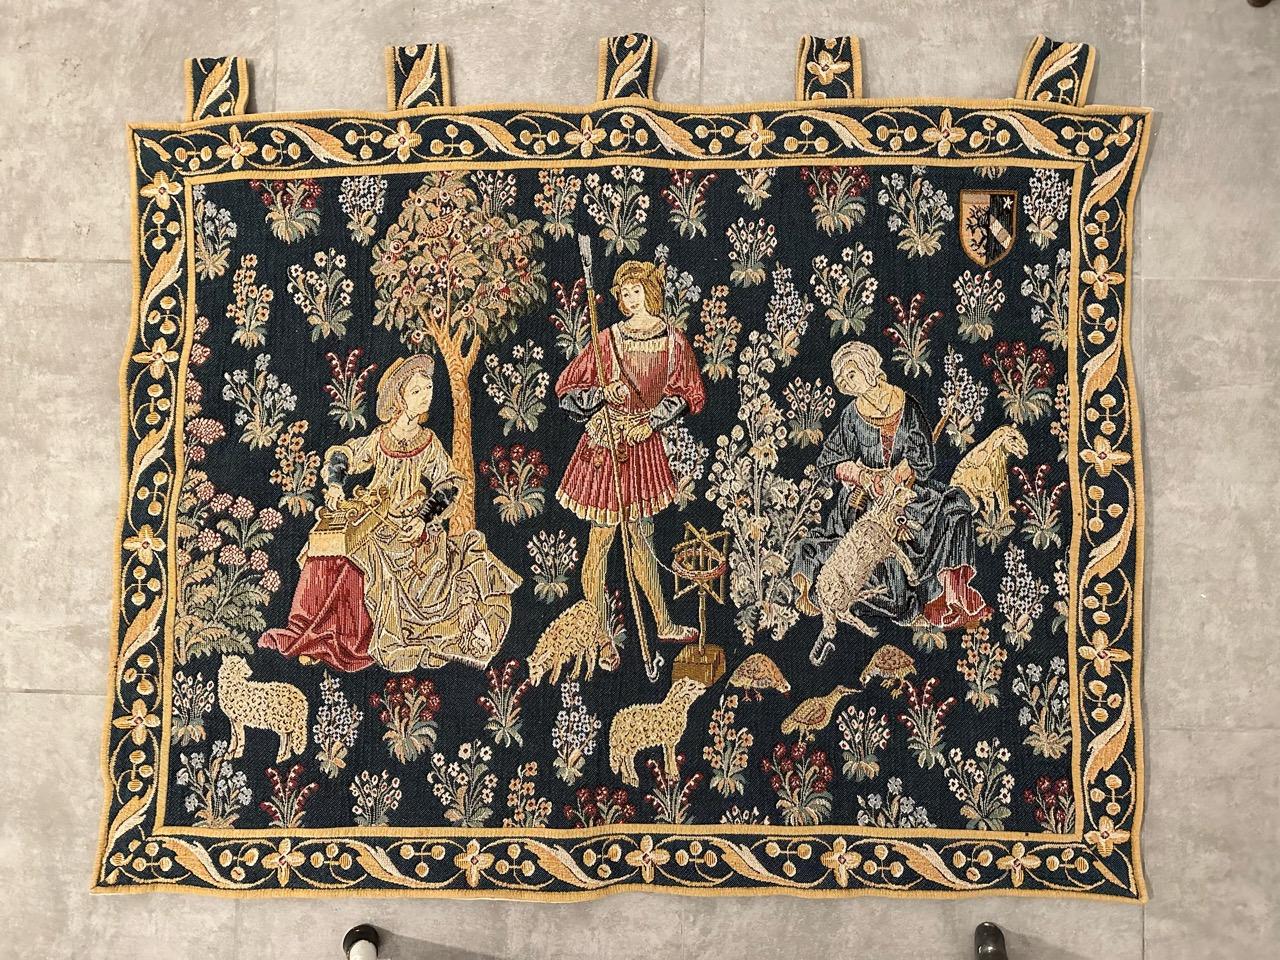 Very pretty mid century French tapestry with nice medieval design and beautiful colors, mechanical Jaquar manufacturing woven with wool and cotton.

✨✨✨
